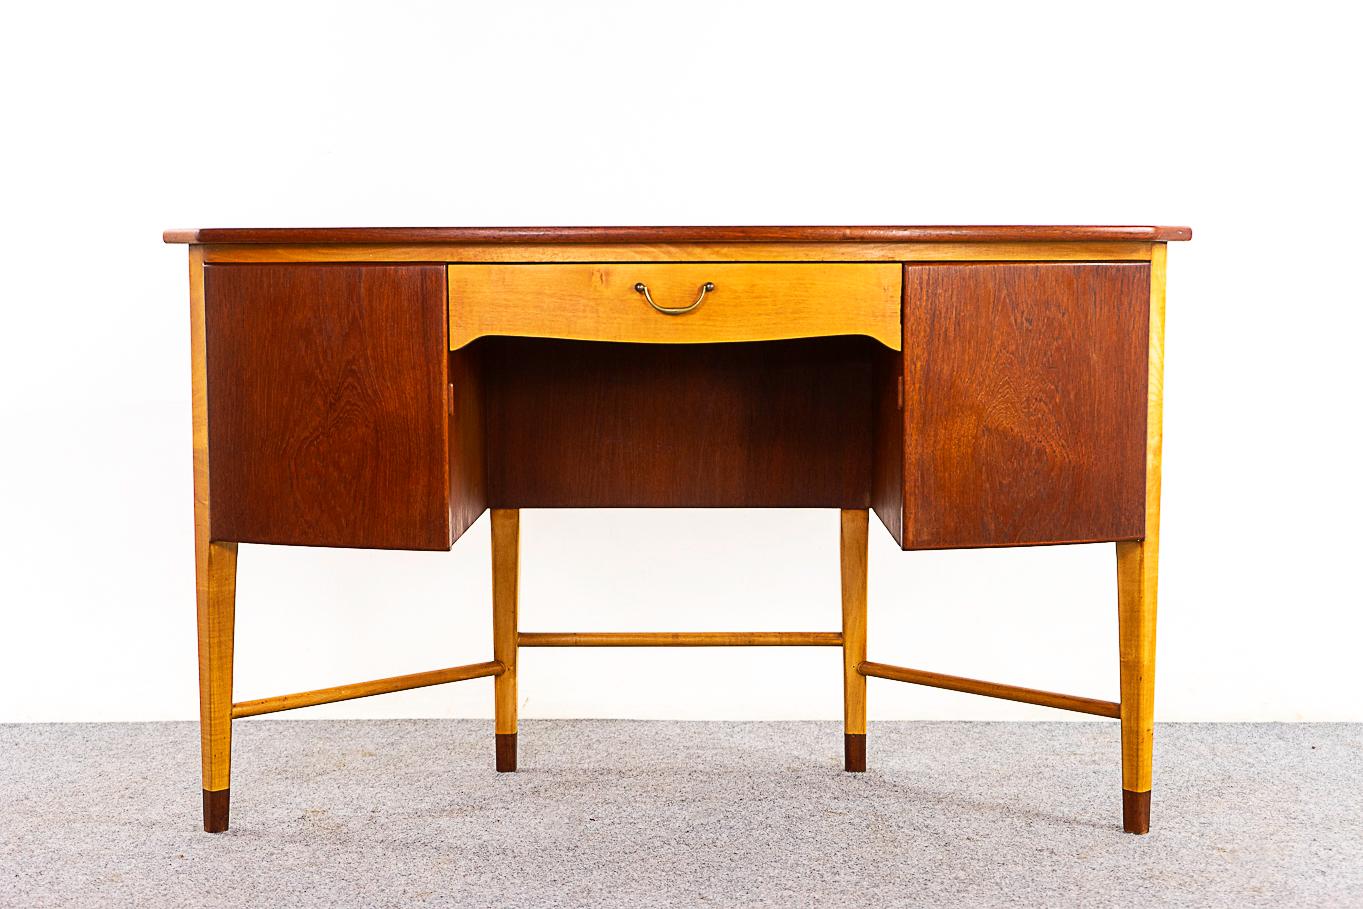 Teak & beech vanity/desk, circa 1950's. Unique shape with triangular storage cubbies and sleek drawer. A combination of teak veneer and contrasting beech throughout. Cross bars add stability to the capped legs. 

Unrestored item with option to